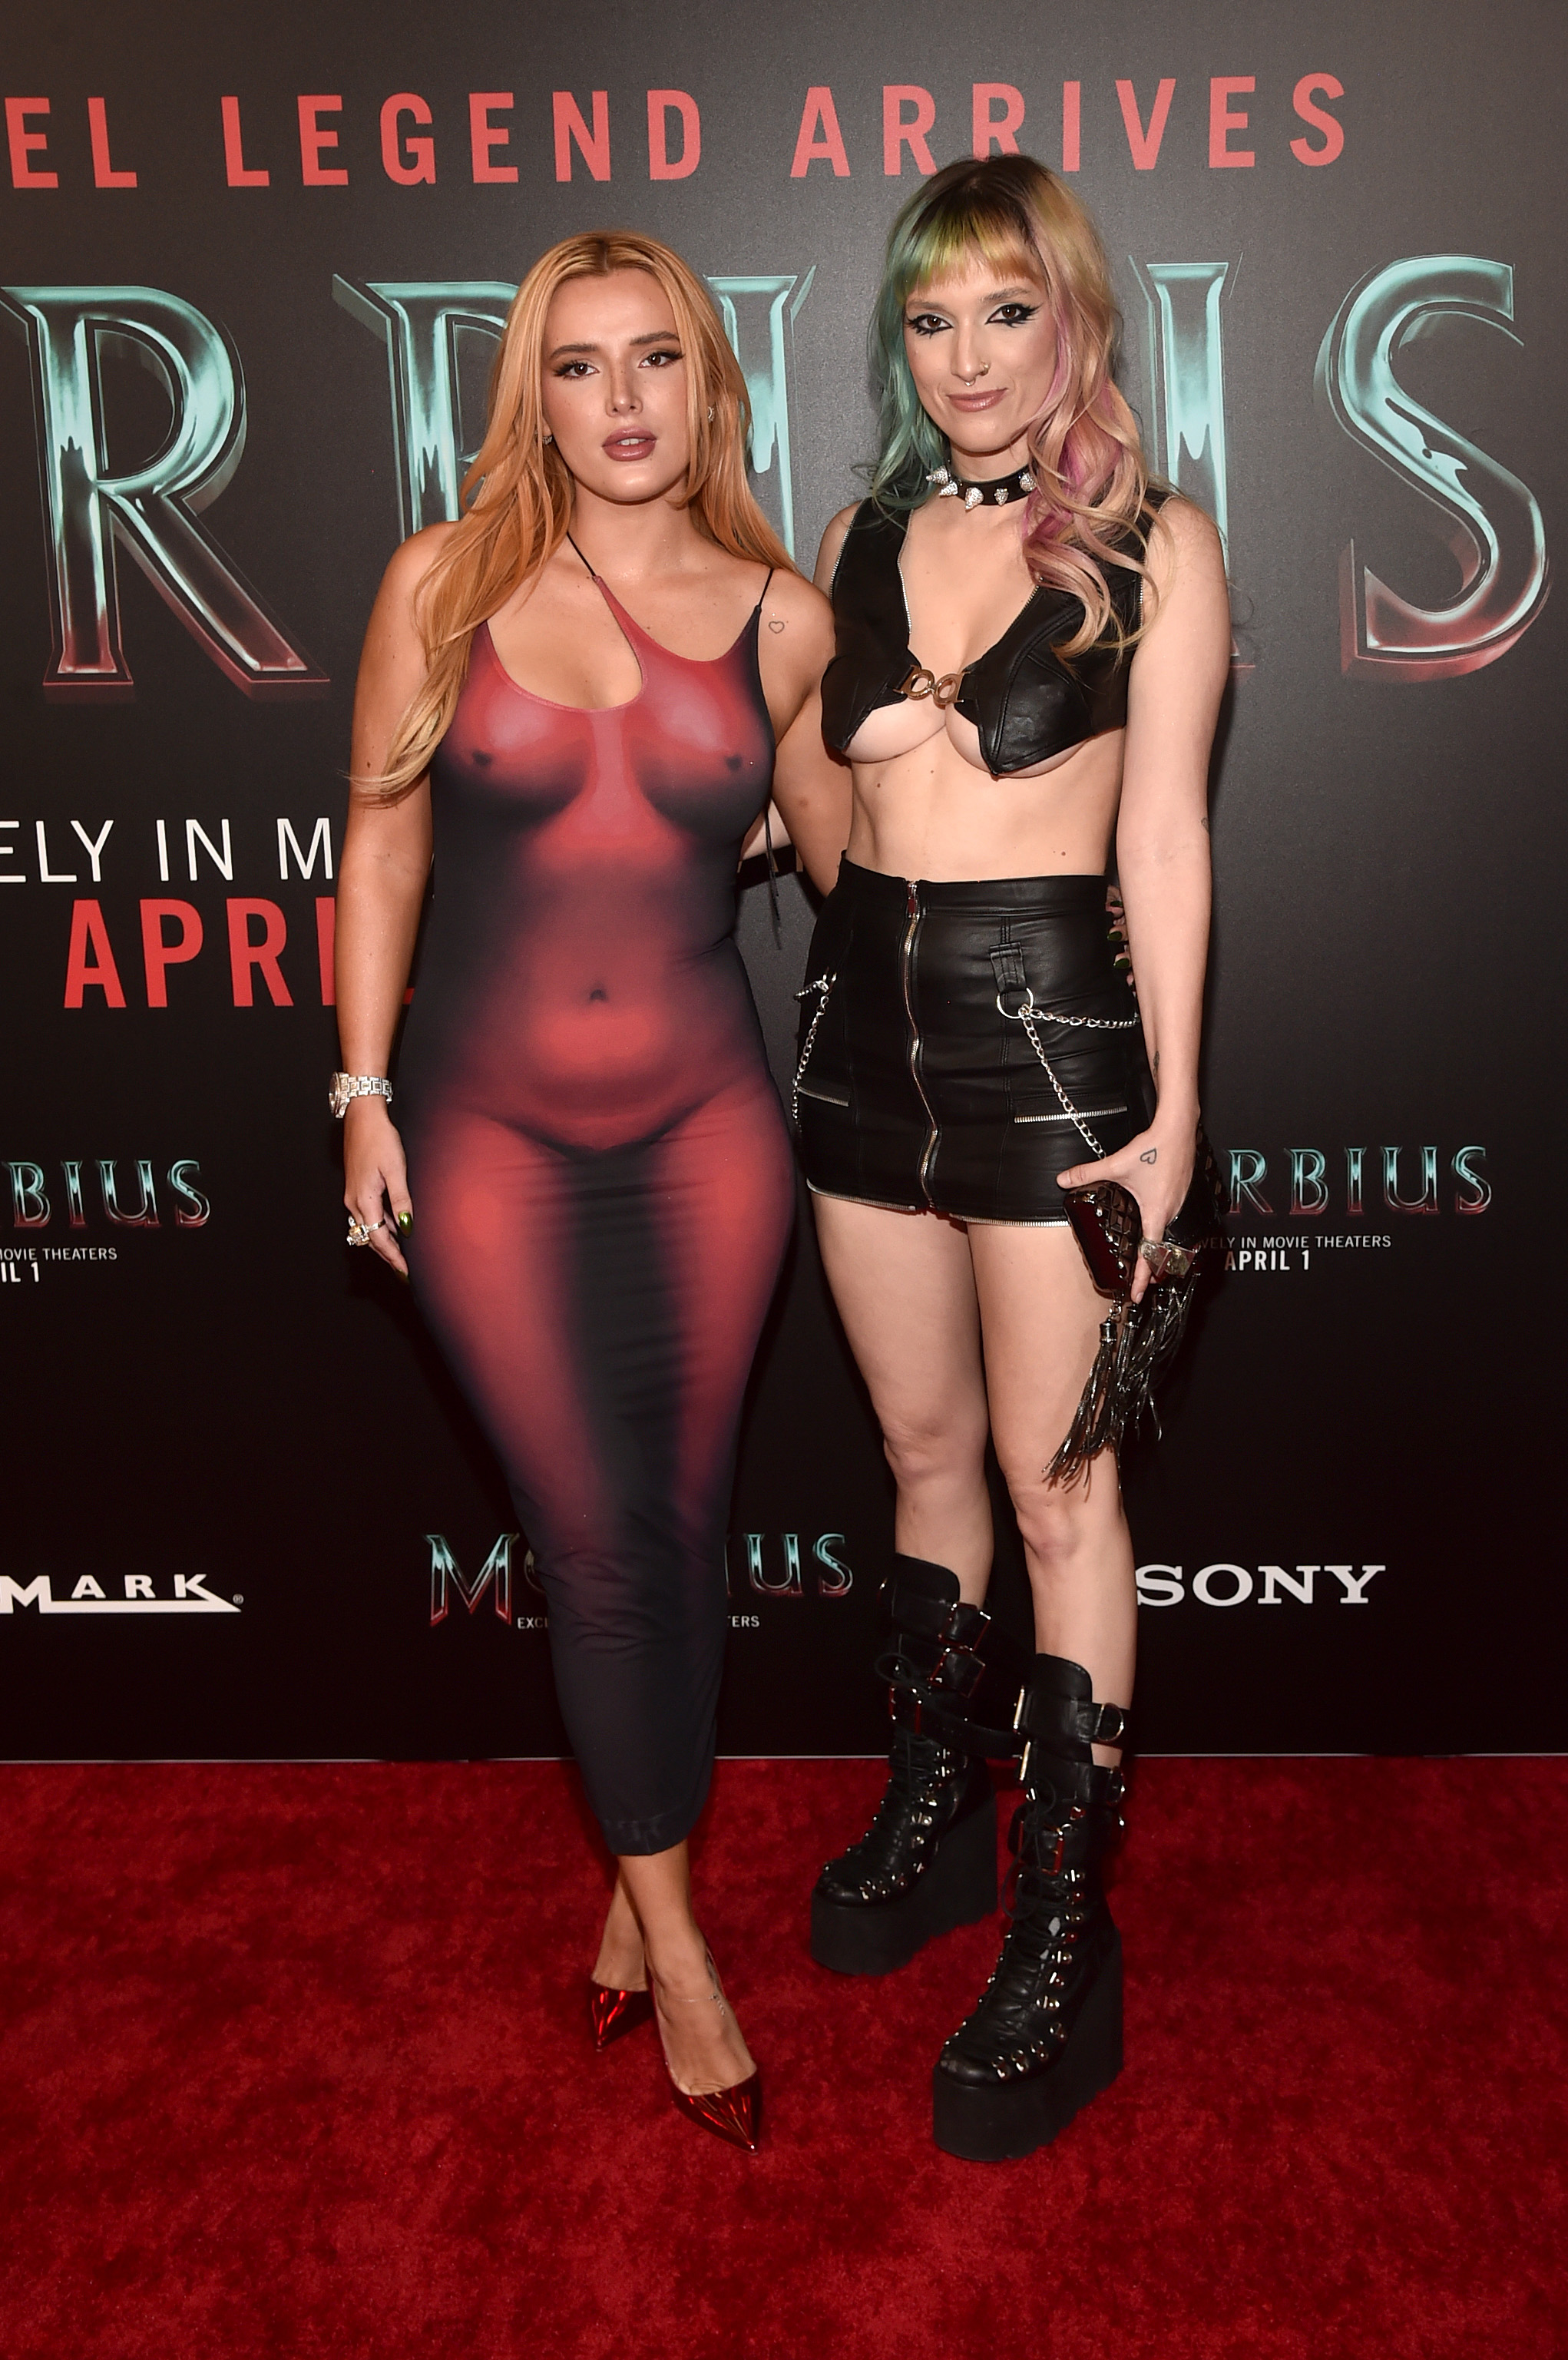 LOS ANGELES, CALIFORNIA - MARCH 30: ((EDITORS NOTE: Image contains partial nudity.) (L-R) Bella Thorne and Dani Thorne attend the "Morbius" Fan Special Screening at Cinemark Playa Vista and XD on March 30, 2022 in Los Angeles, California.  (Photo by Alberto E. Rodriguez/Getty Images)